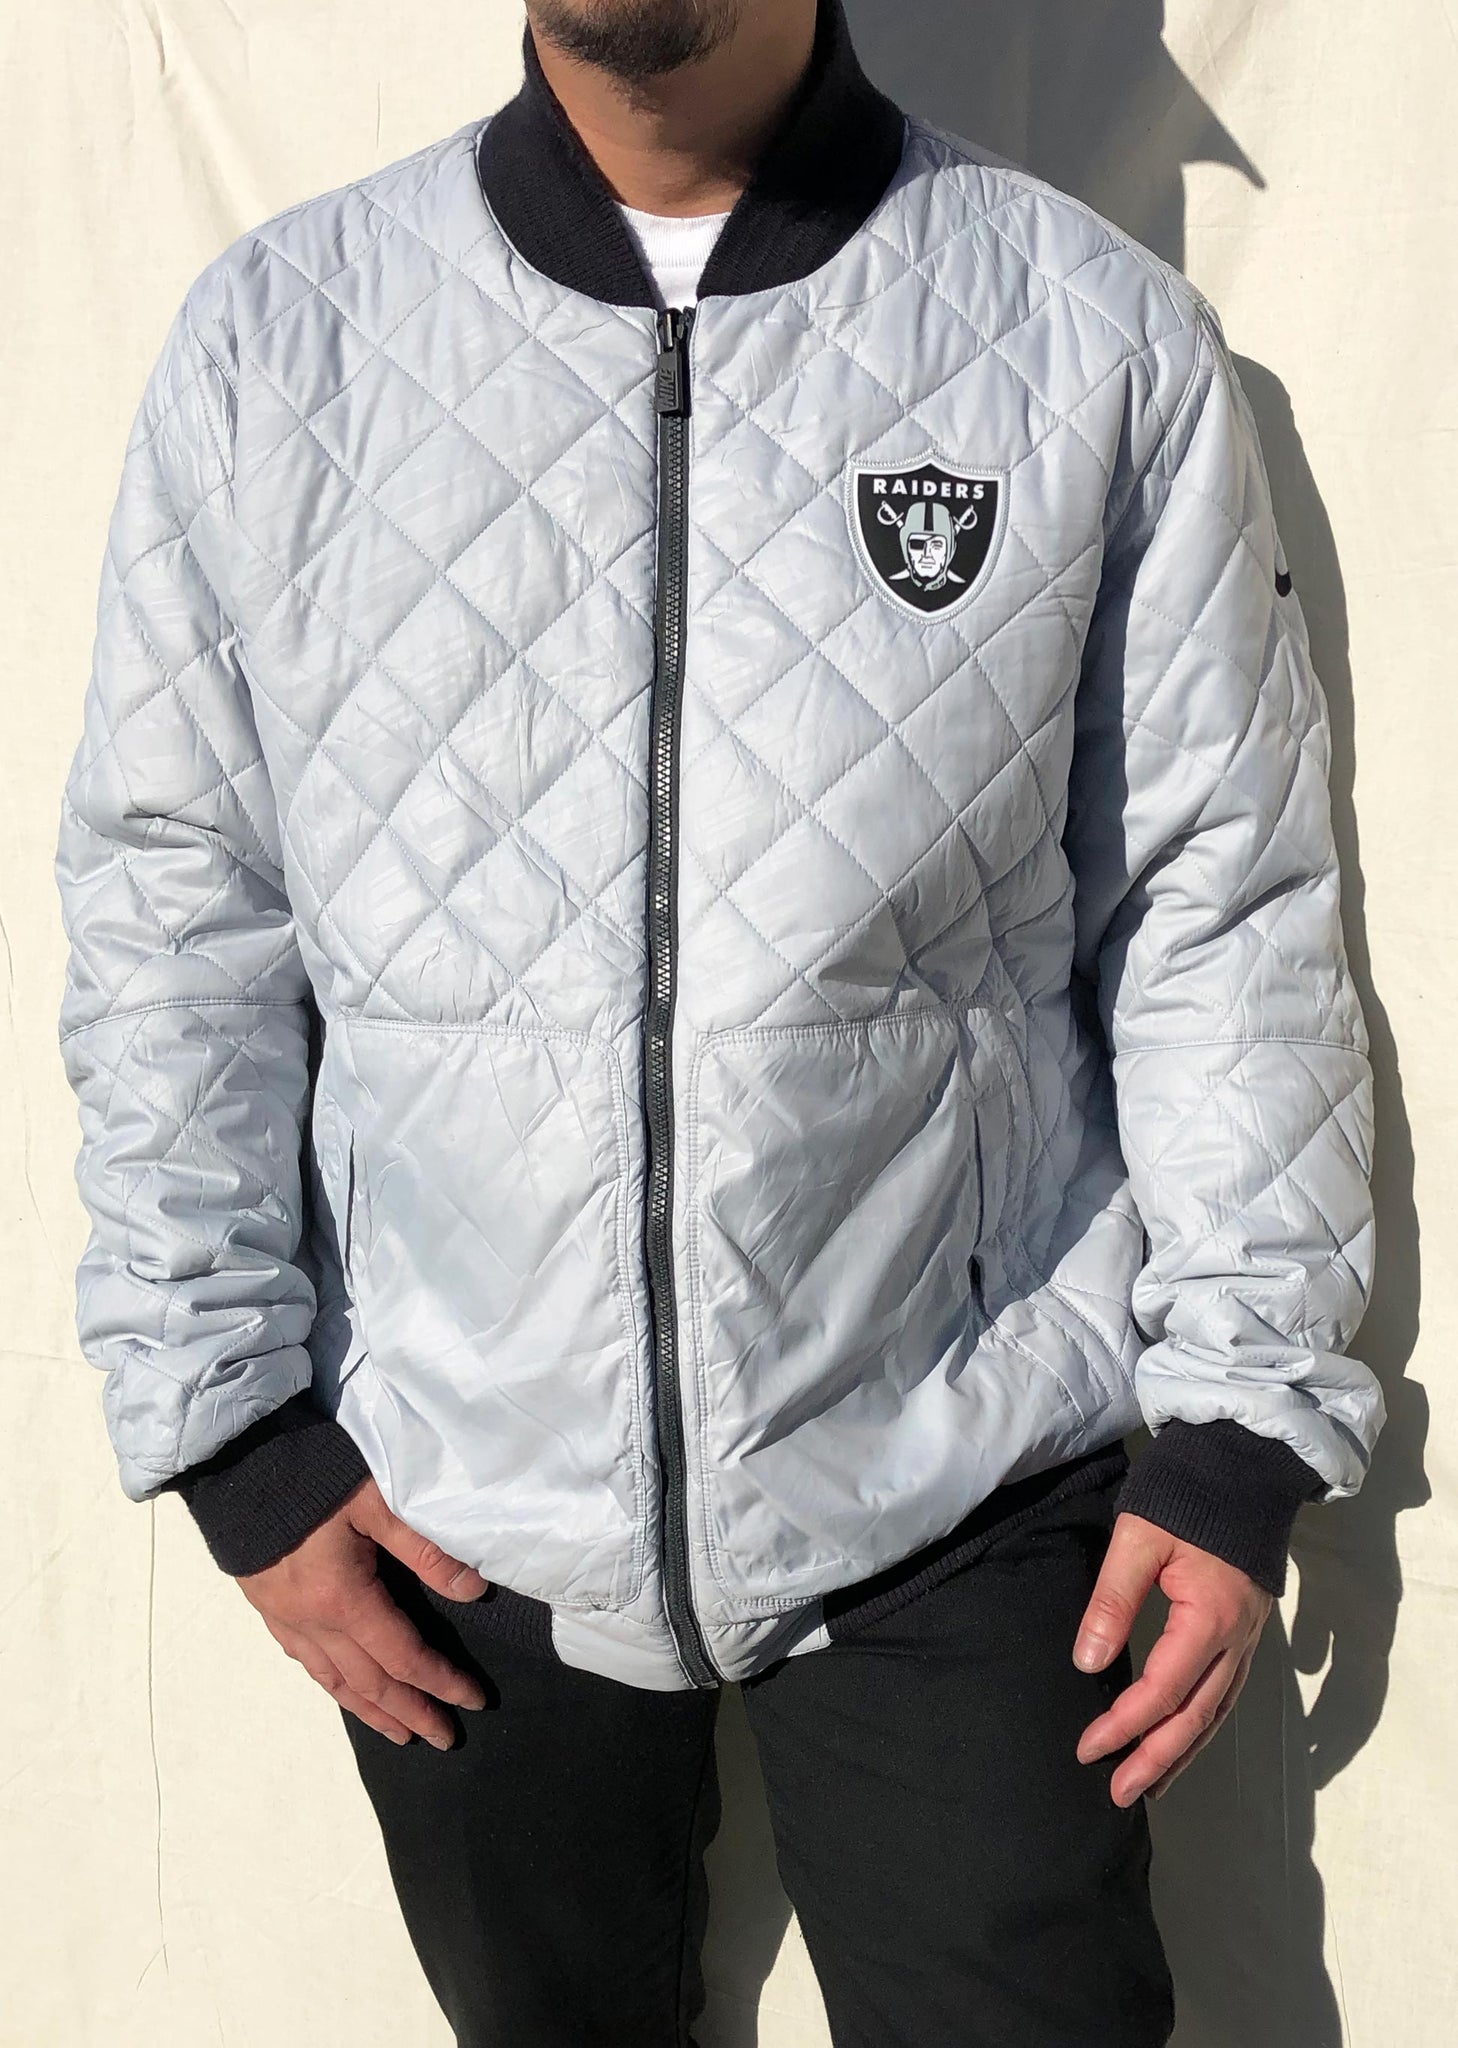 Raiders x Nike Reversible Bomber Jacket Black/Silver (XL) – Official